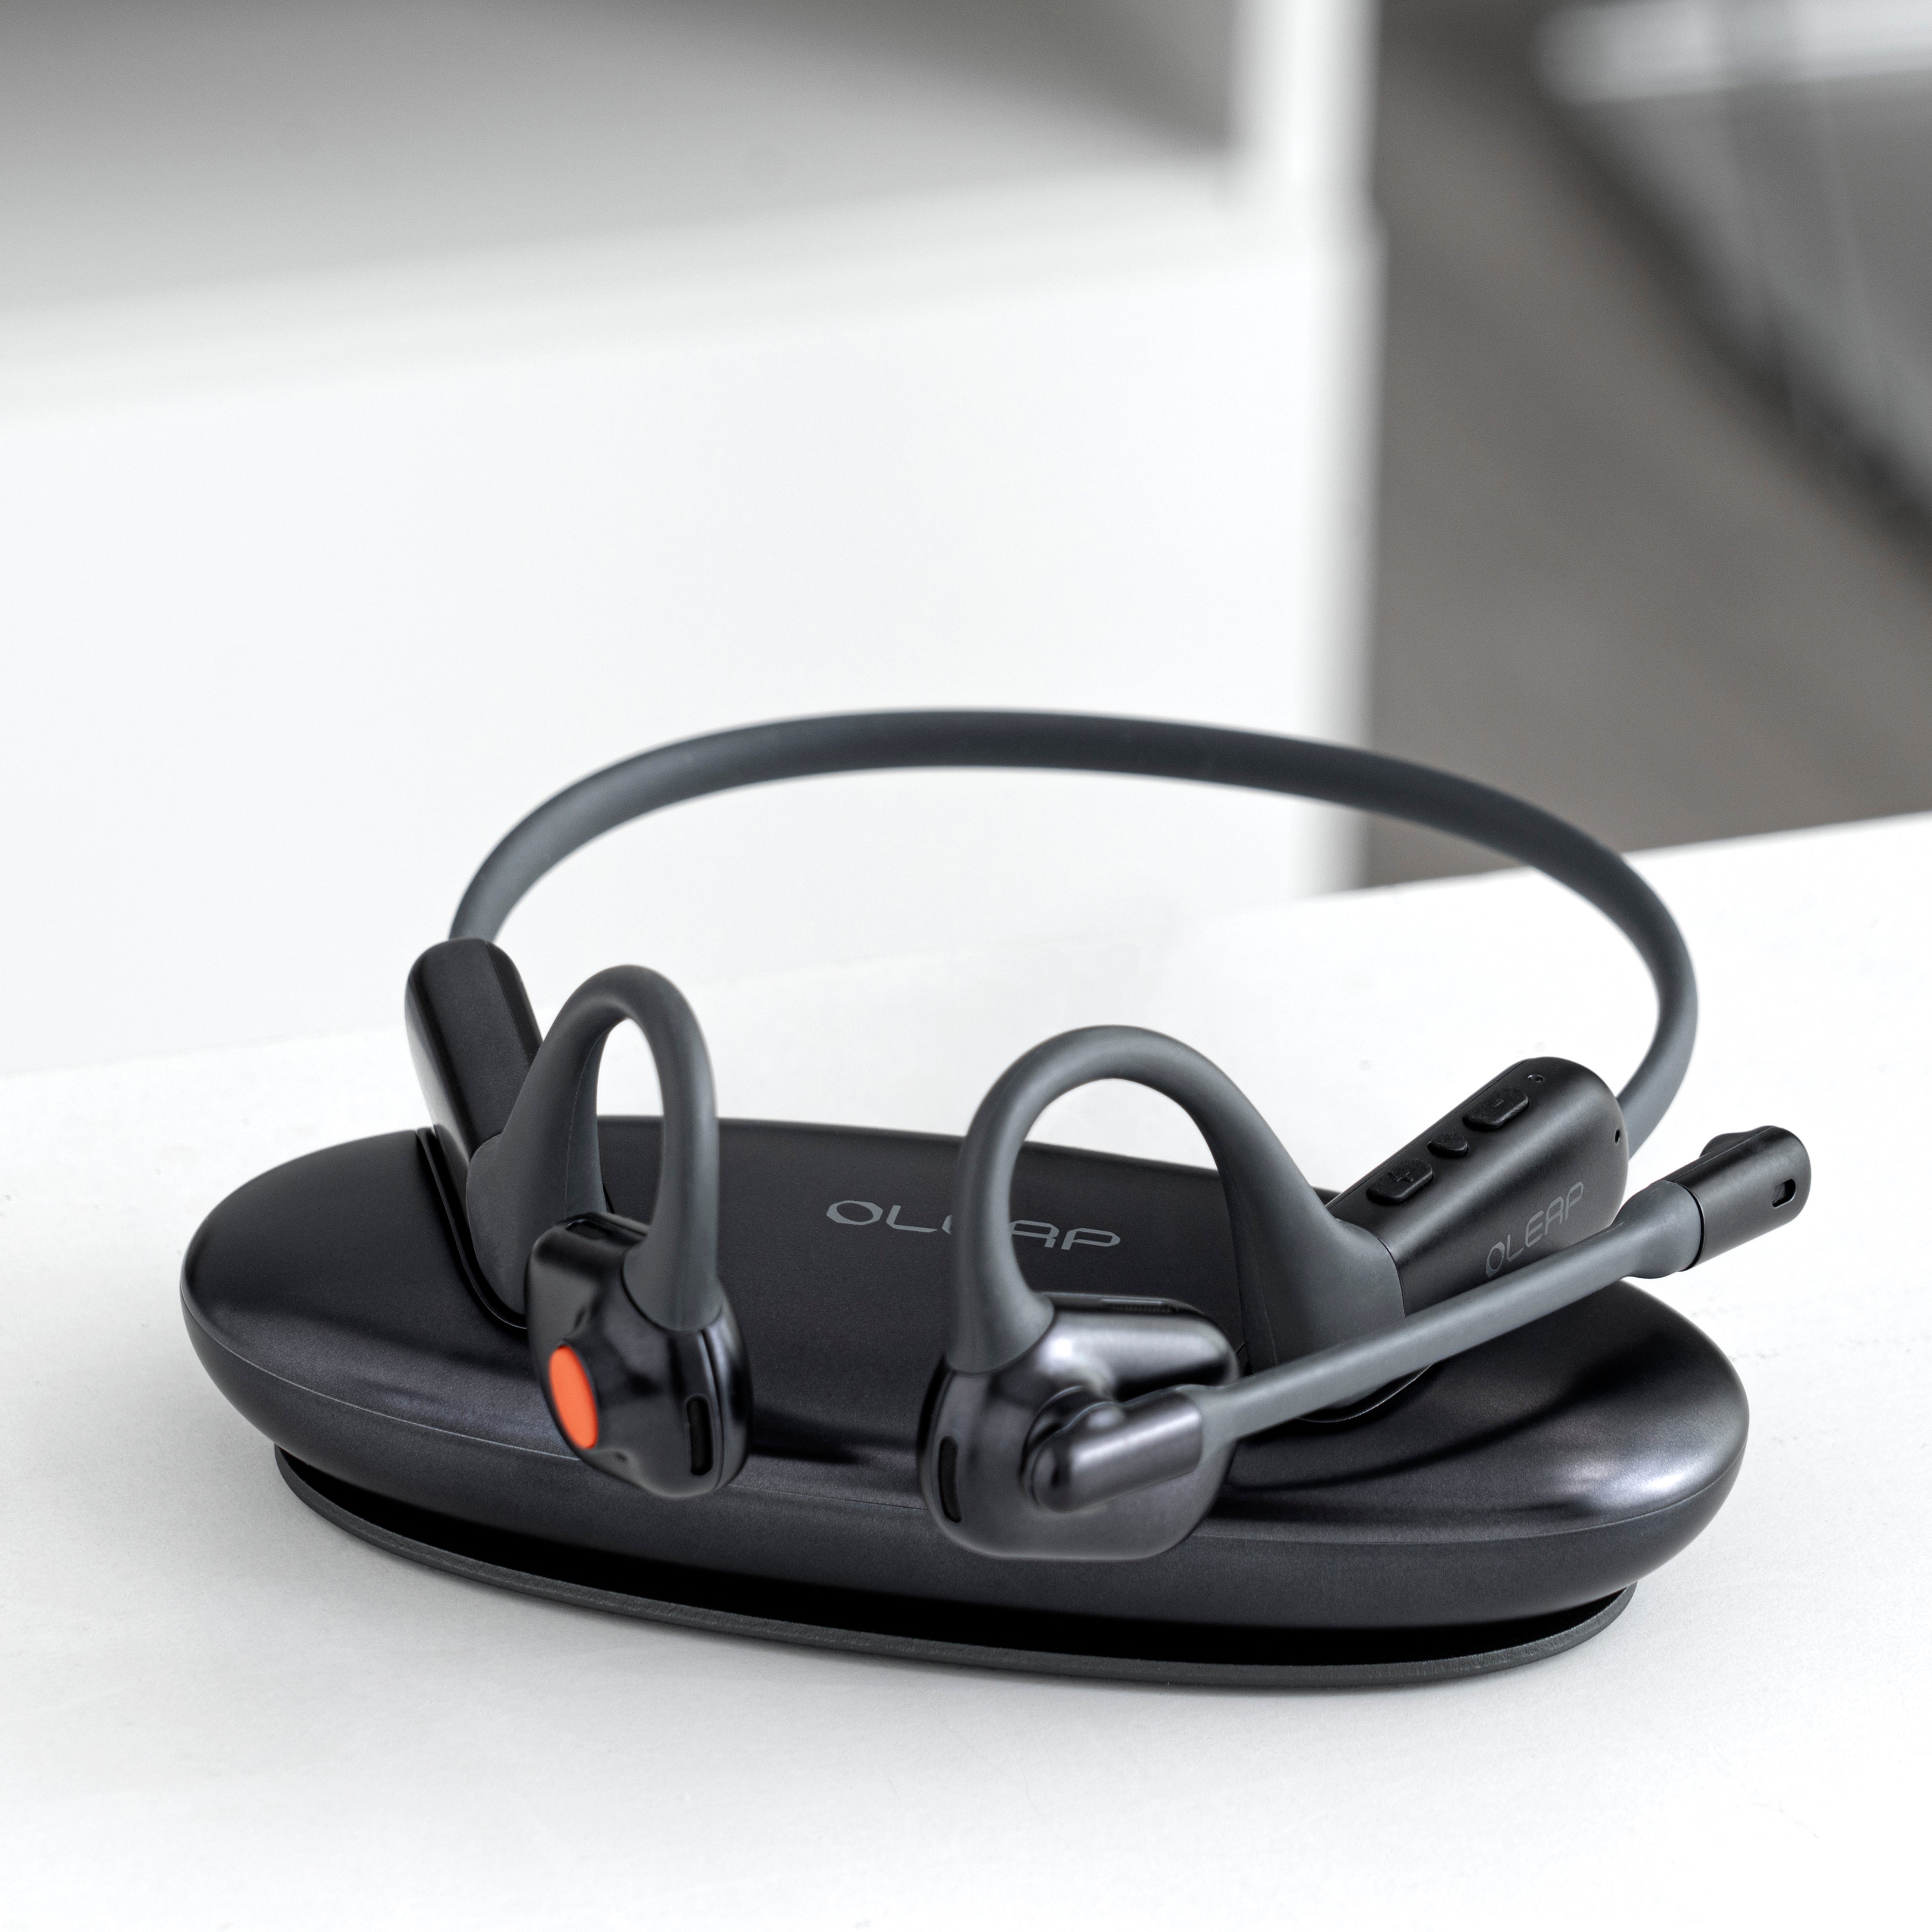 Oleap Pilot - The Best Call Headset with ENC Noise Reduction Technology